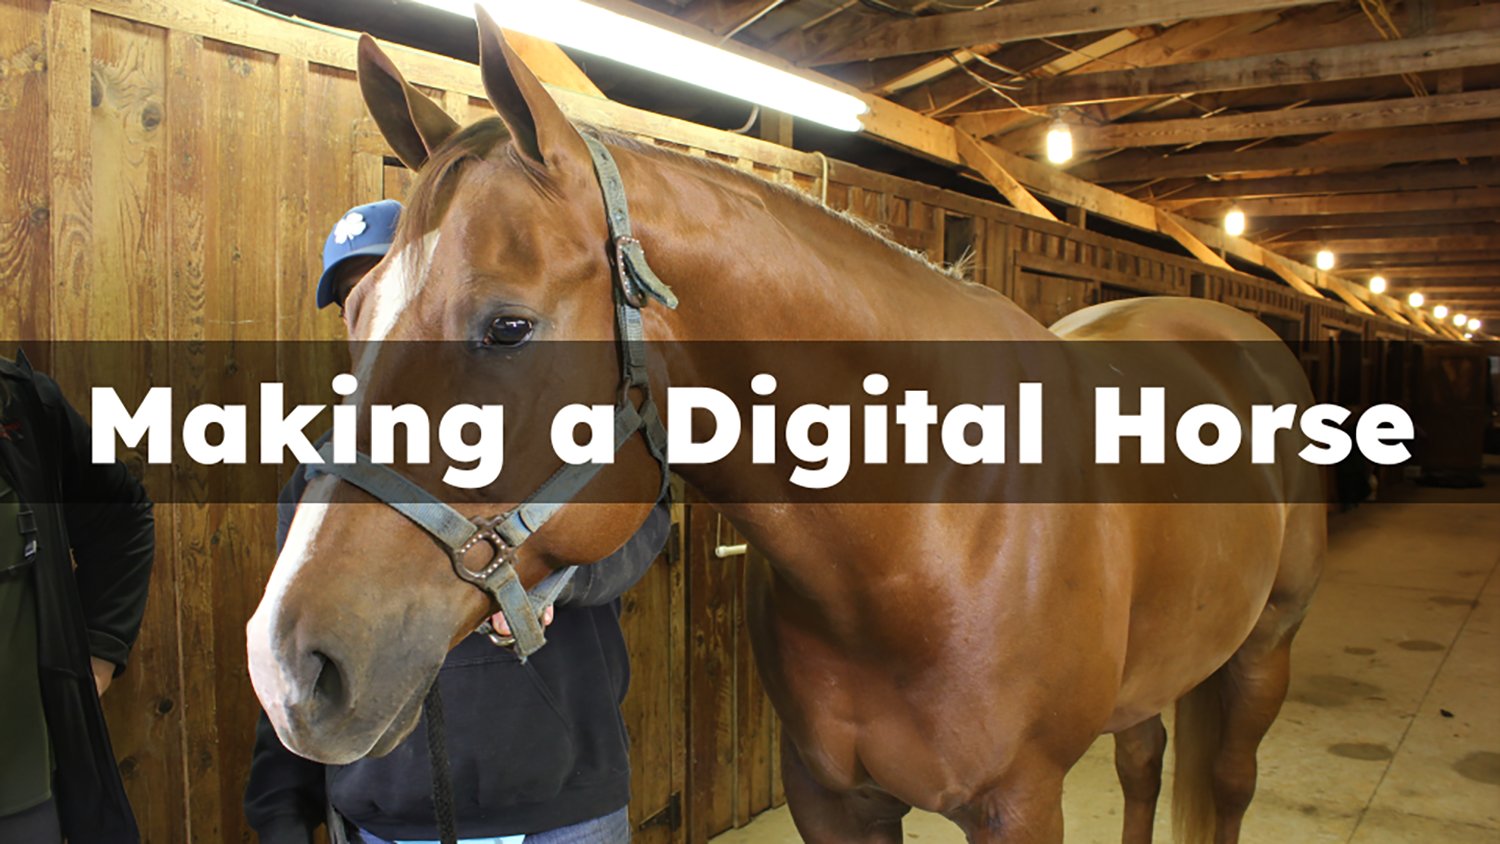 Quarter horse with text "Making a Digital Horse"